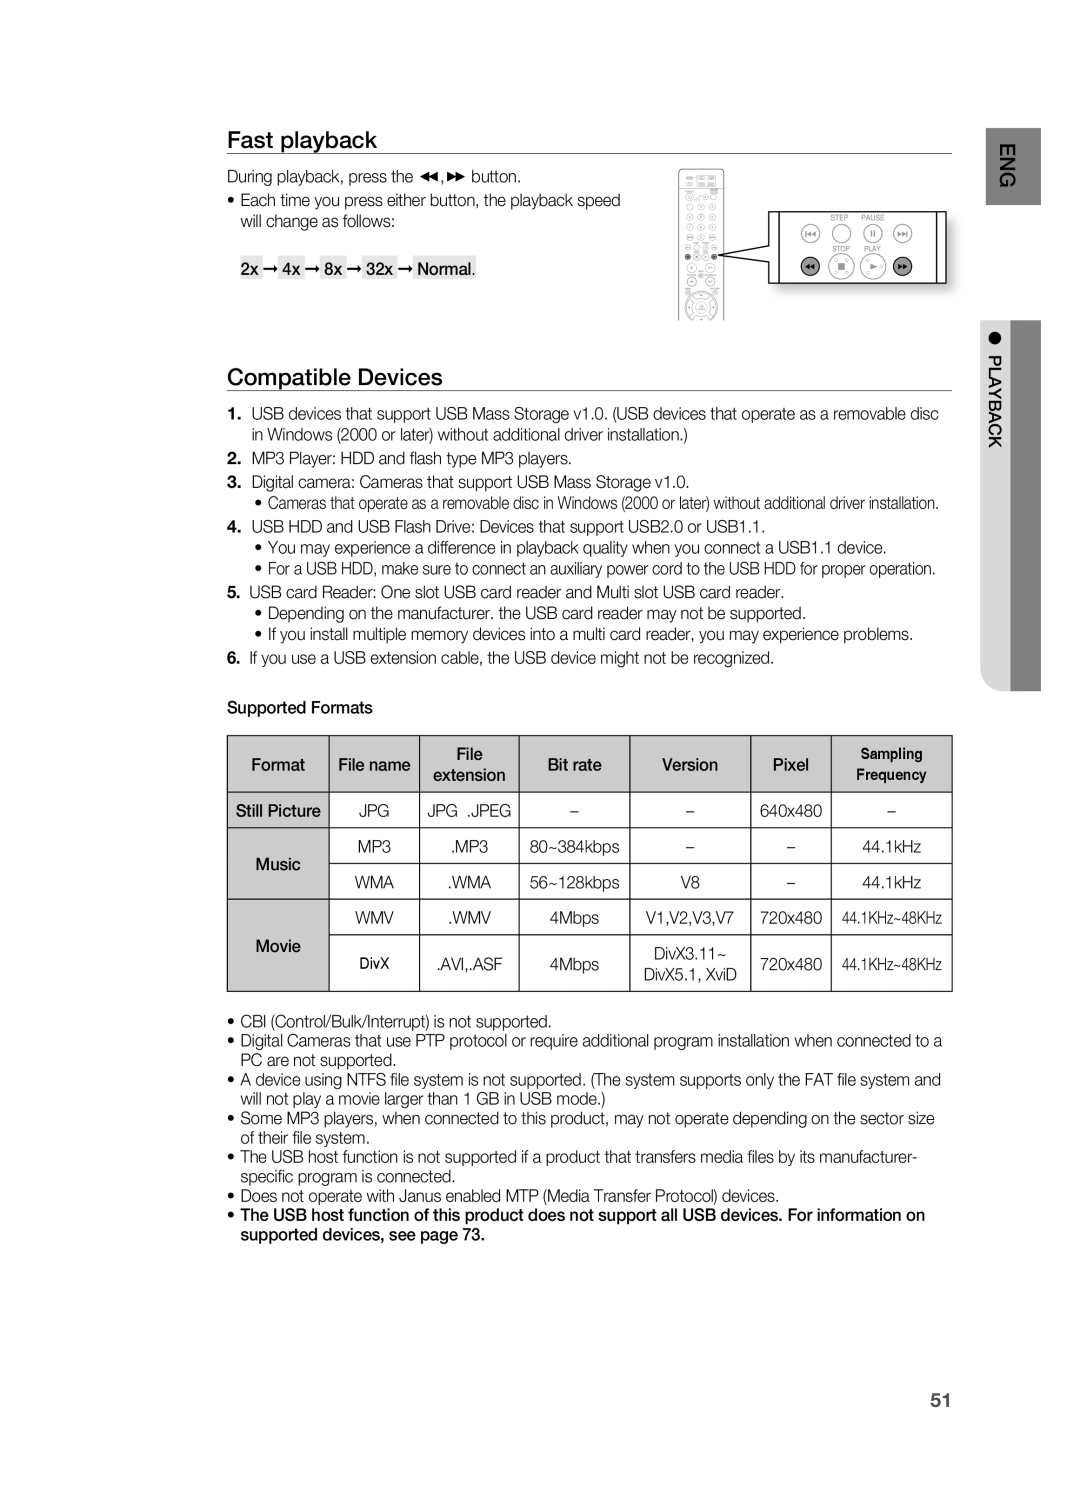 Samsung HT-TZ515 user manual Fast playback, Compatible Devices 